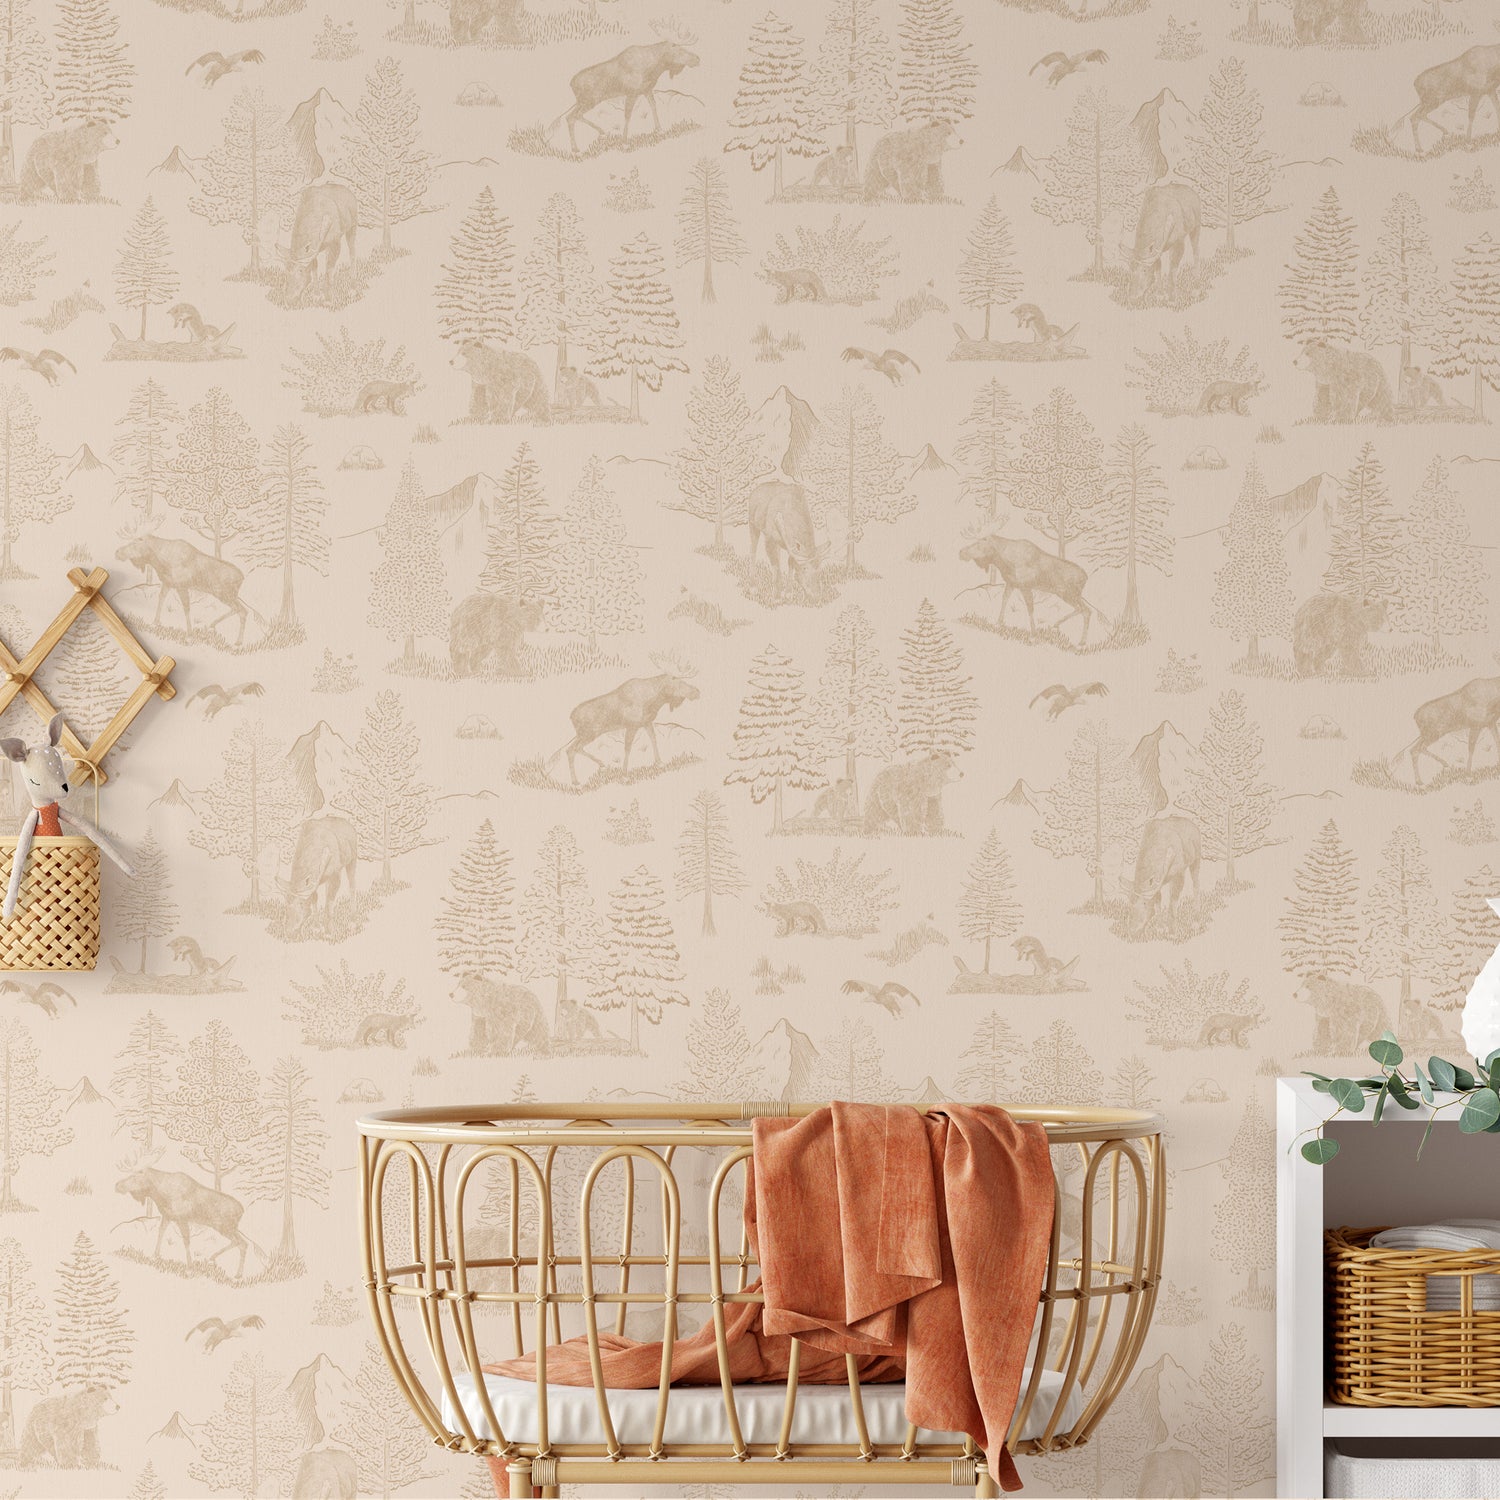 Bedroom featuring Cayla Naylor Denali- Dogwood Peel and Stick Wallpaper - a nature inspired pattern